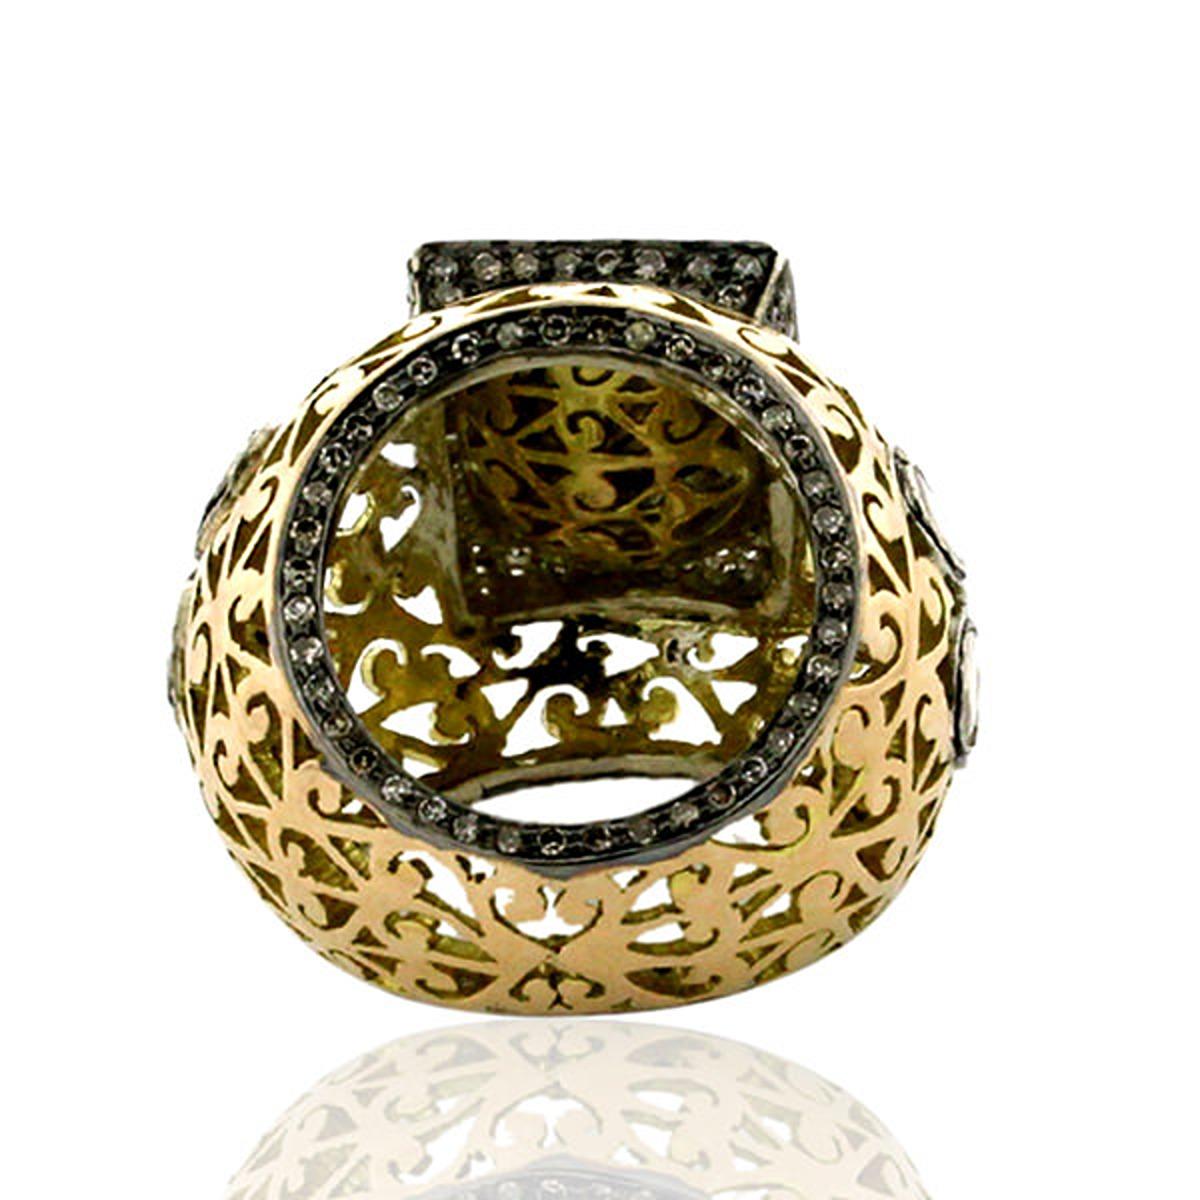 Mixed Cut Slice & Rosecut Diamonds Cocktail Ring w/ Filigree Design Made In Gold & Silver For Sale